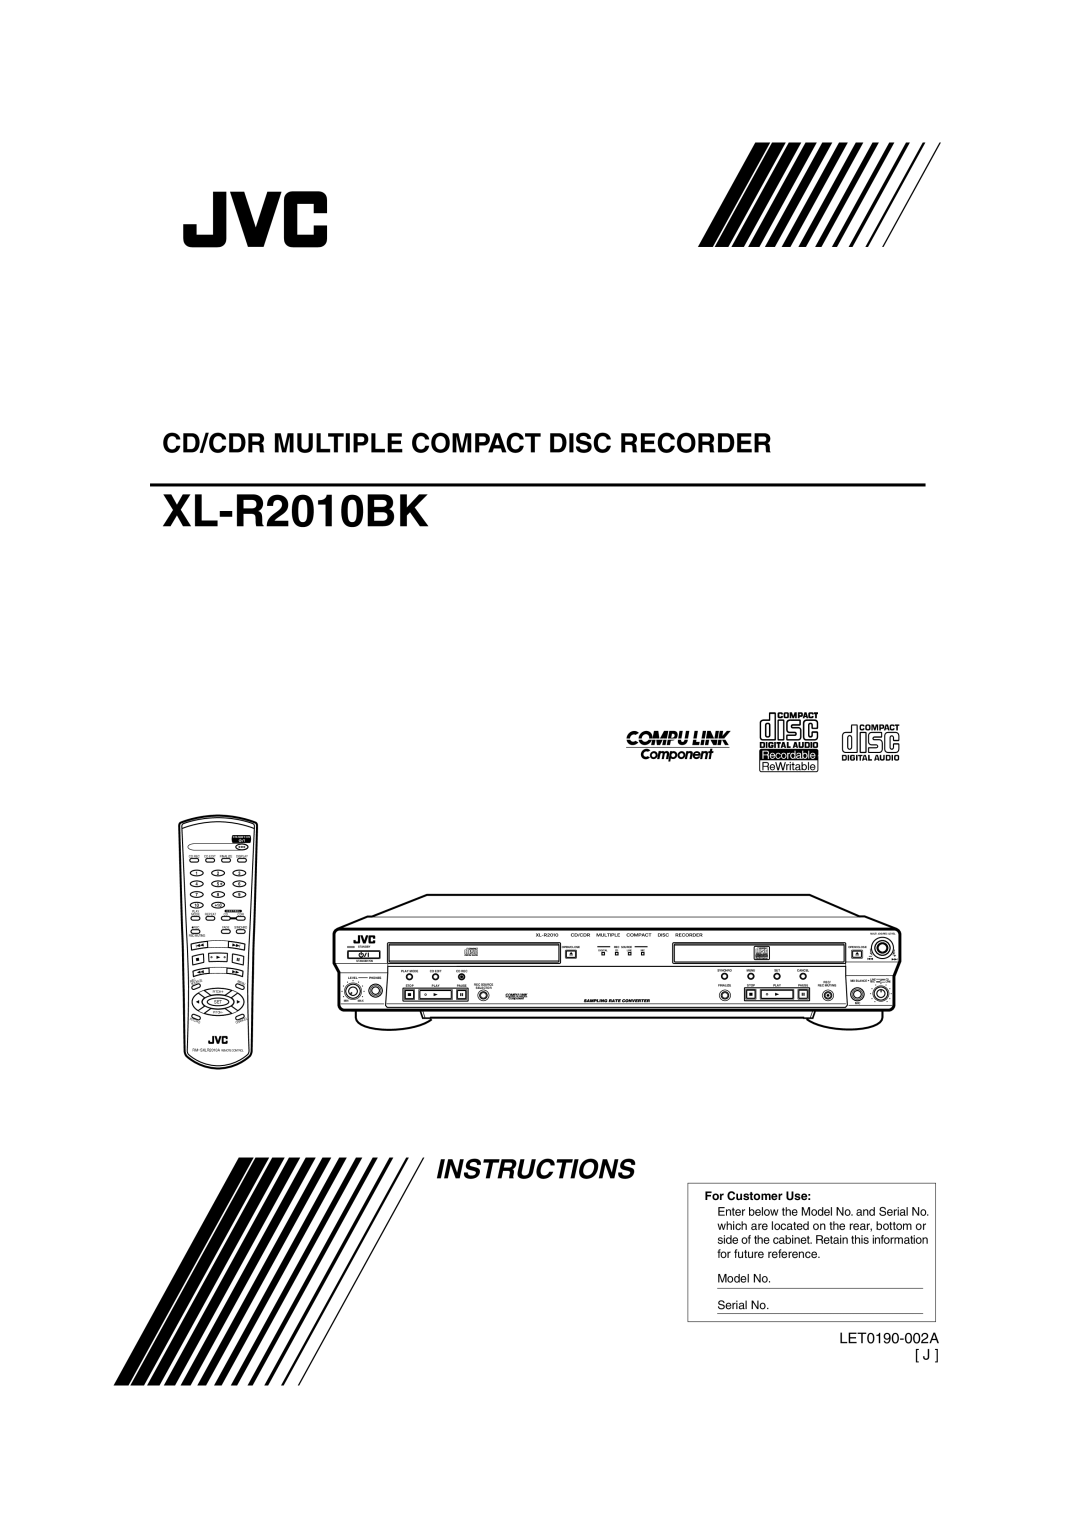 JVC XL-R2010BK manual Cd/Cdr Multiple Compact Disc Recorder, Instructions, LET0190-002A J, For Customer Use 